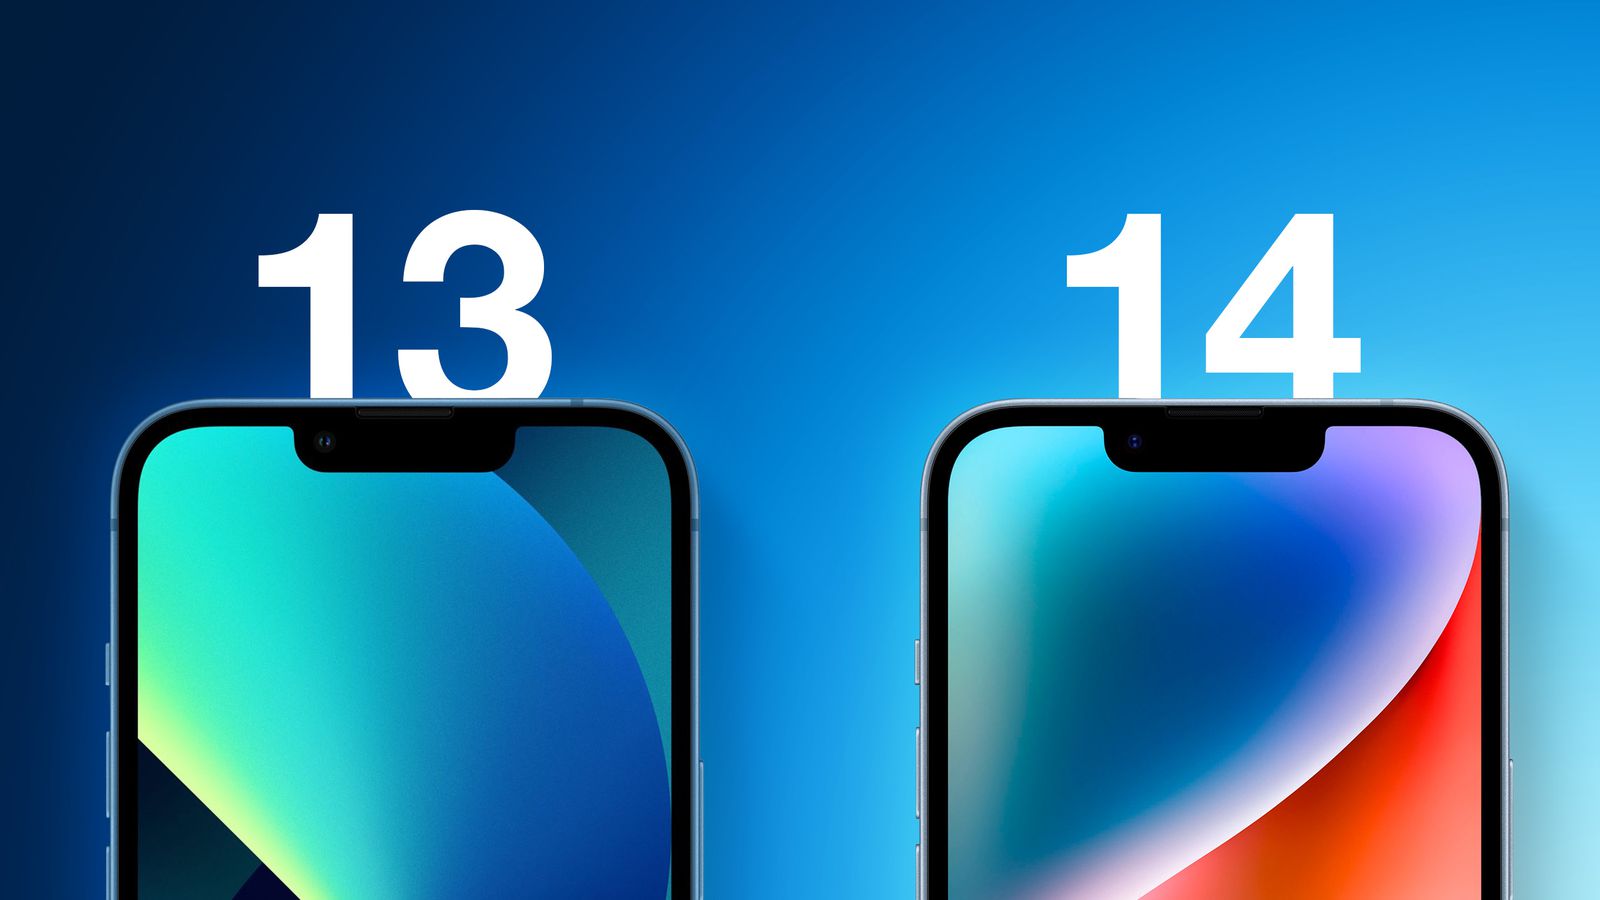 iPhone 13, iPhone 12, iPhone 11 users! Should you upgrade to